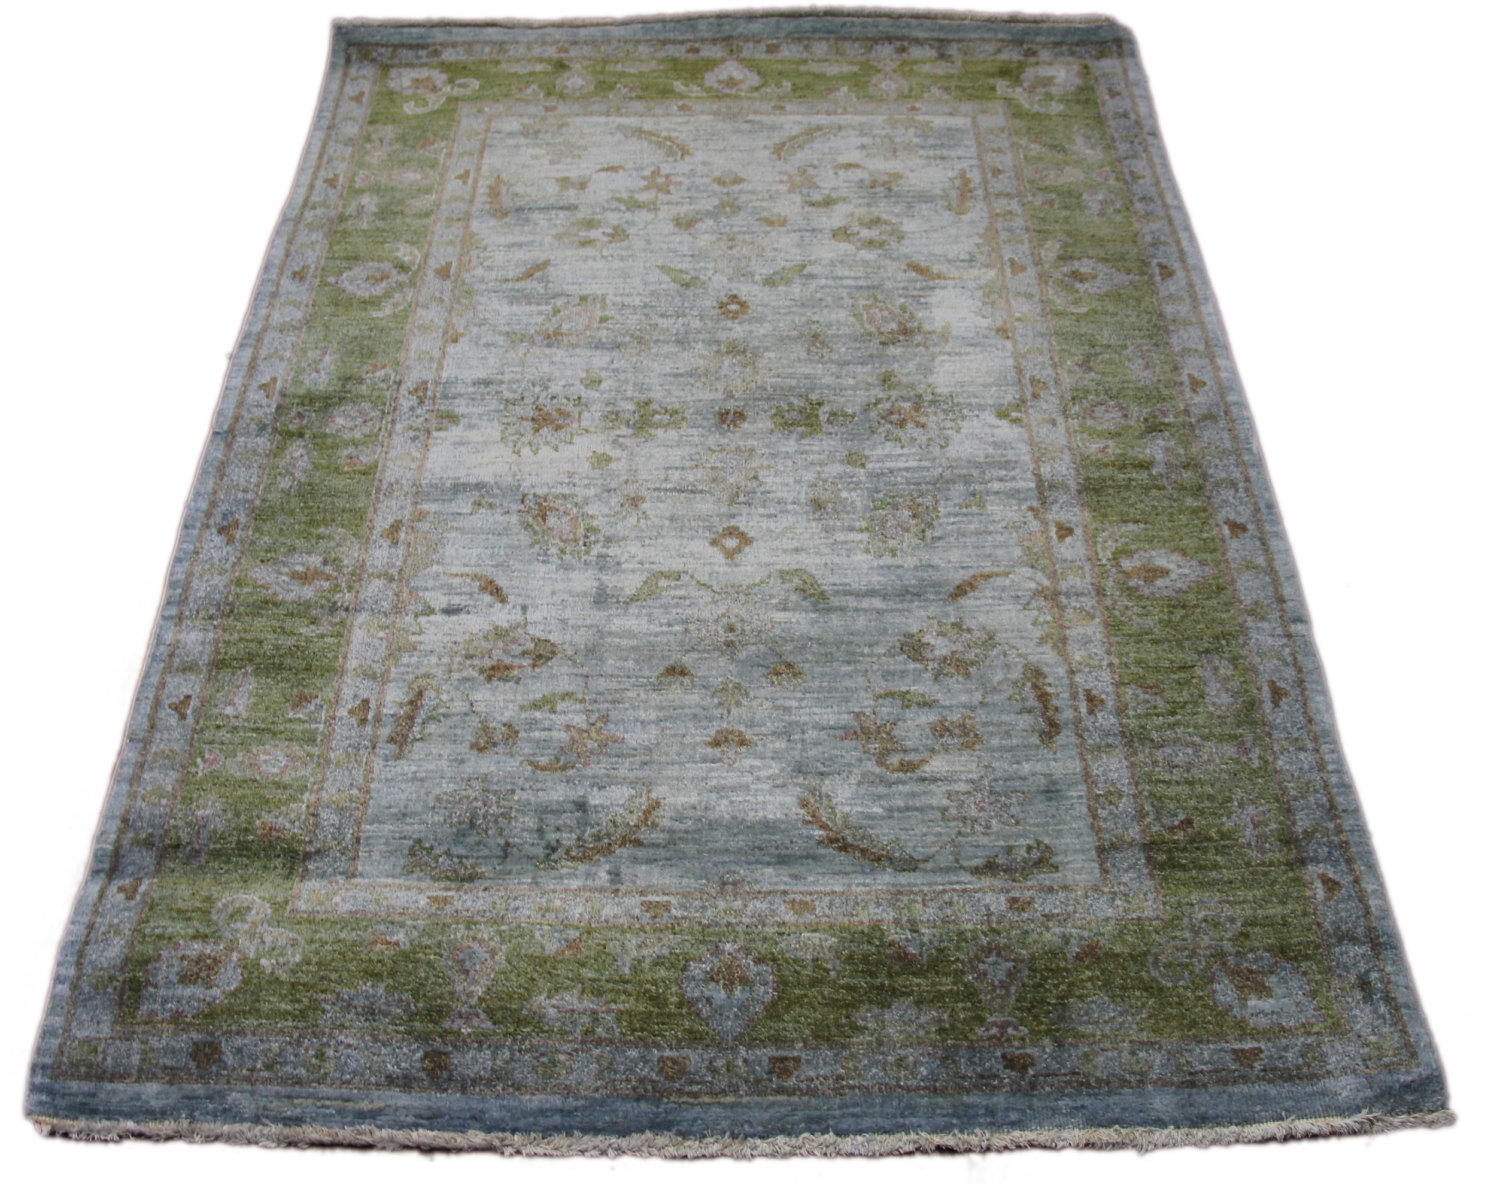 Emerald Peridot Green 4x6 Over-dyed Handknotted Wool Rug 2779